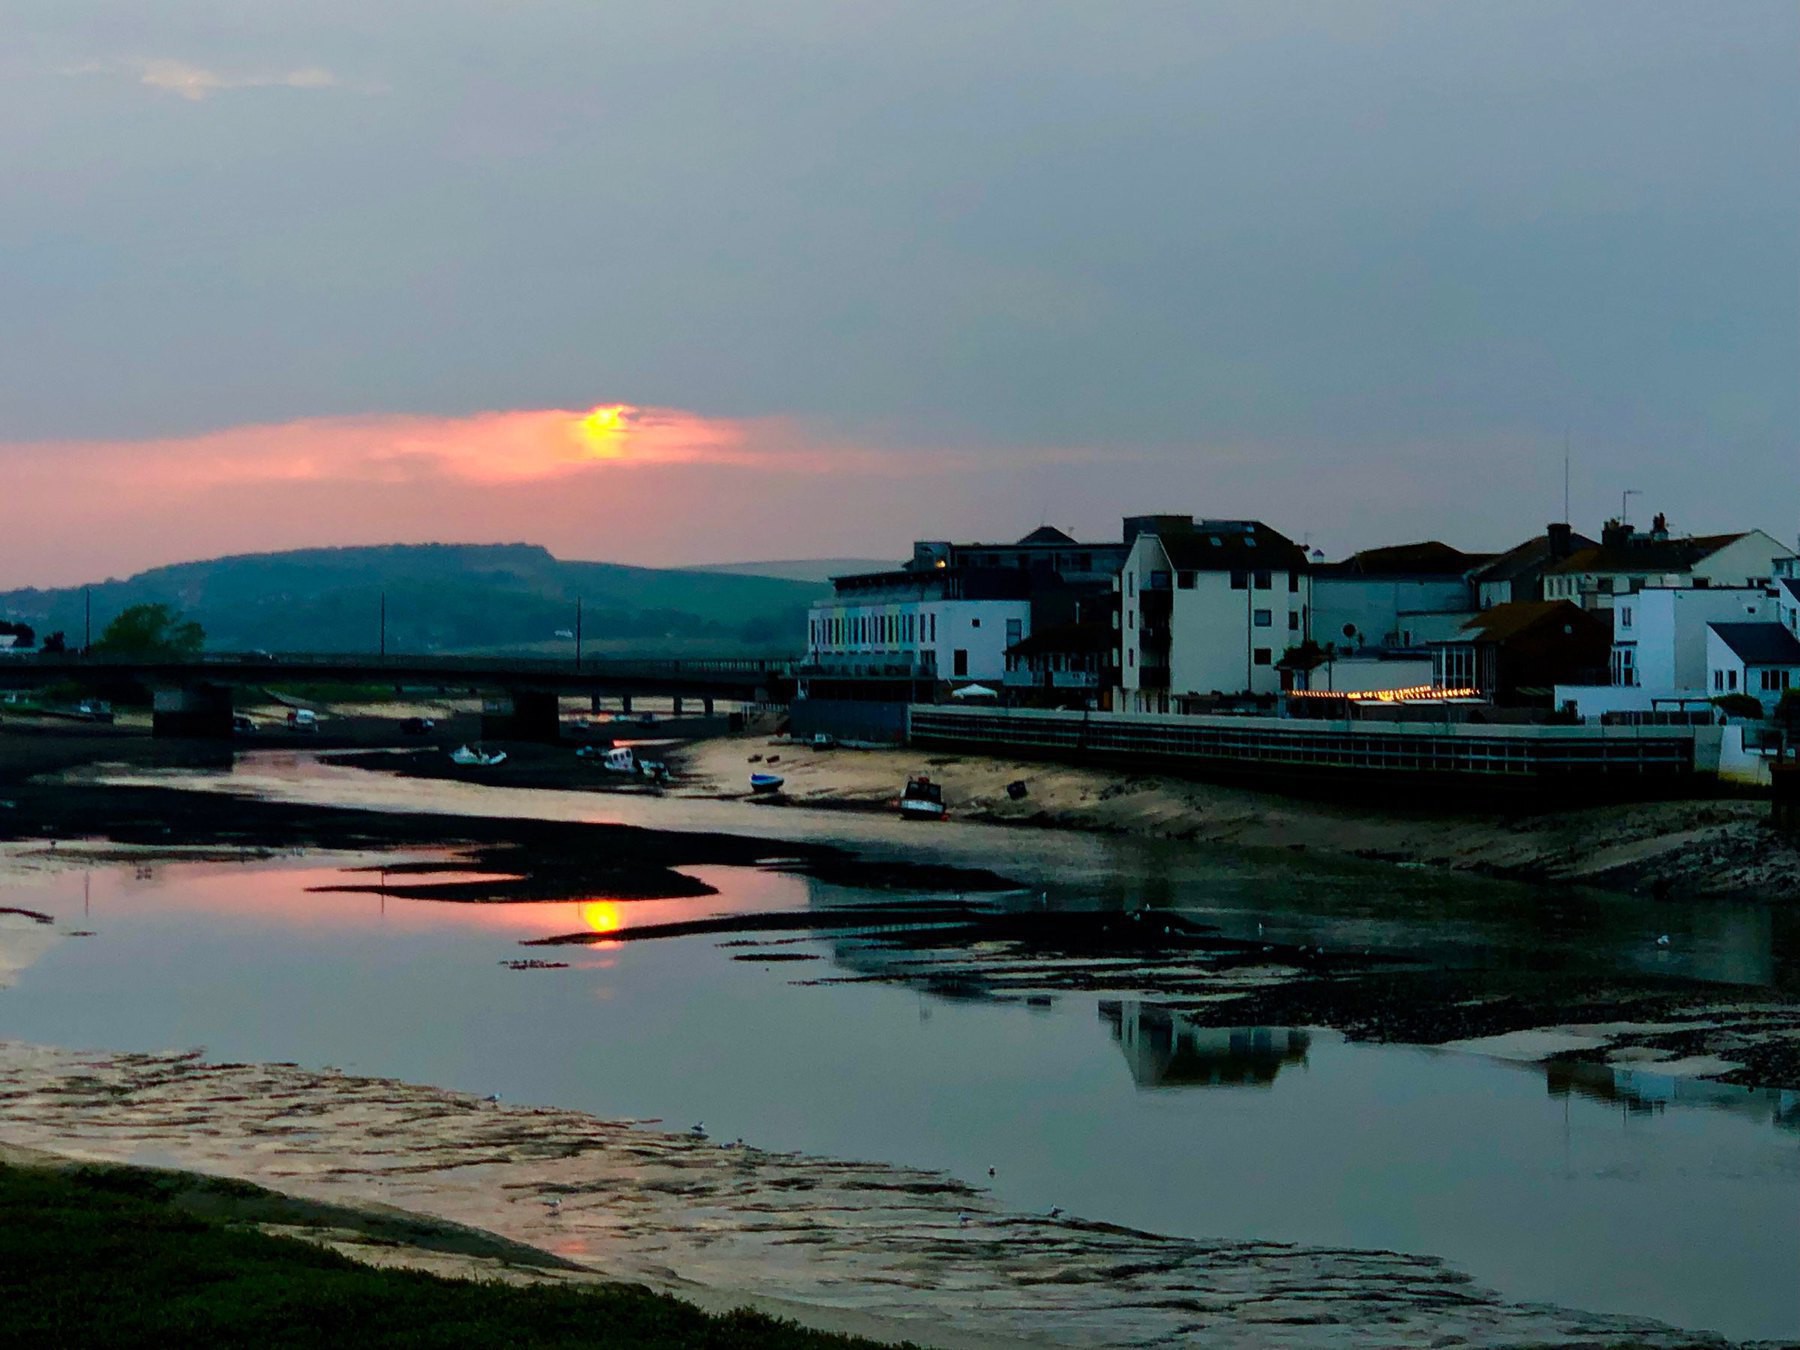 View towards New Shoreham and the South Downs from the Adur Ferry Bridge.